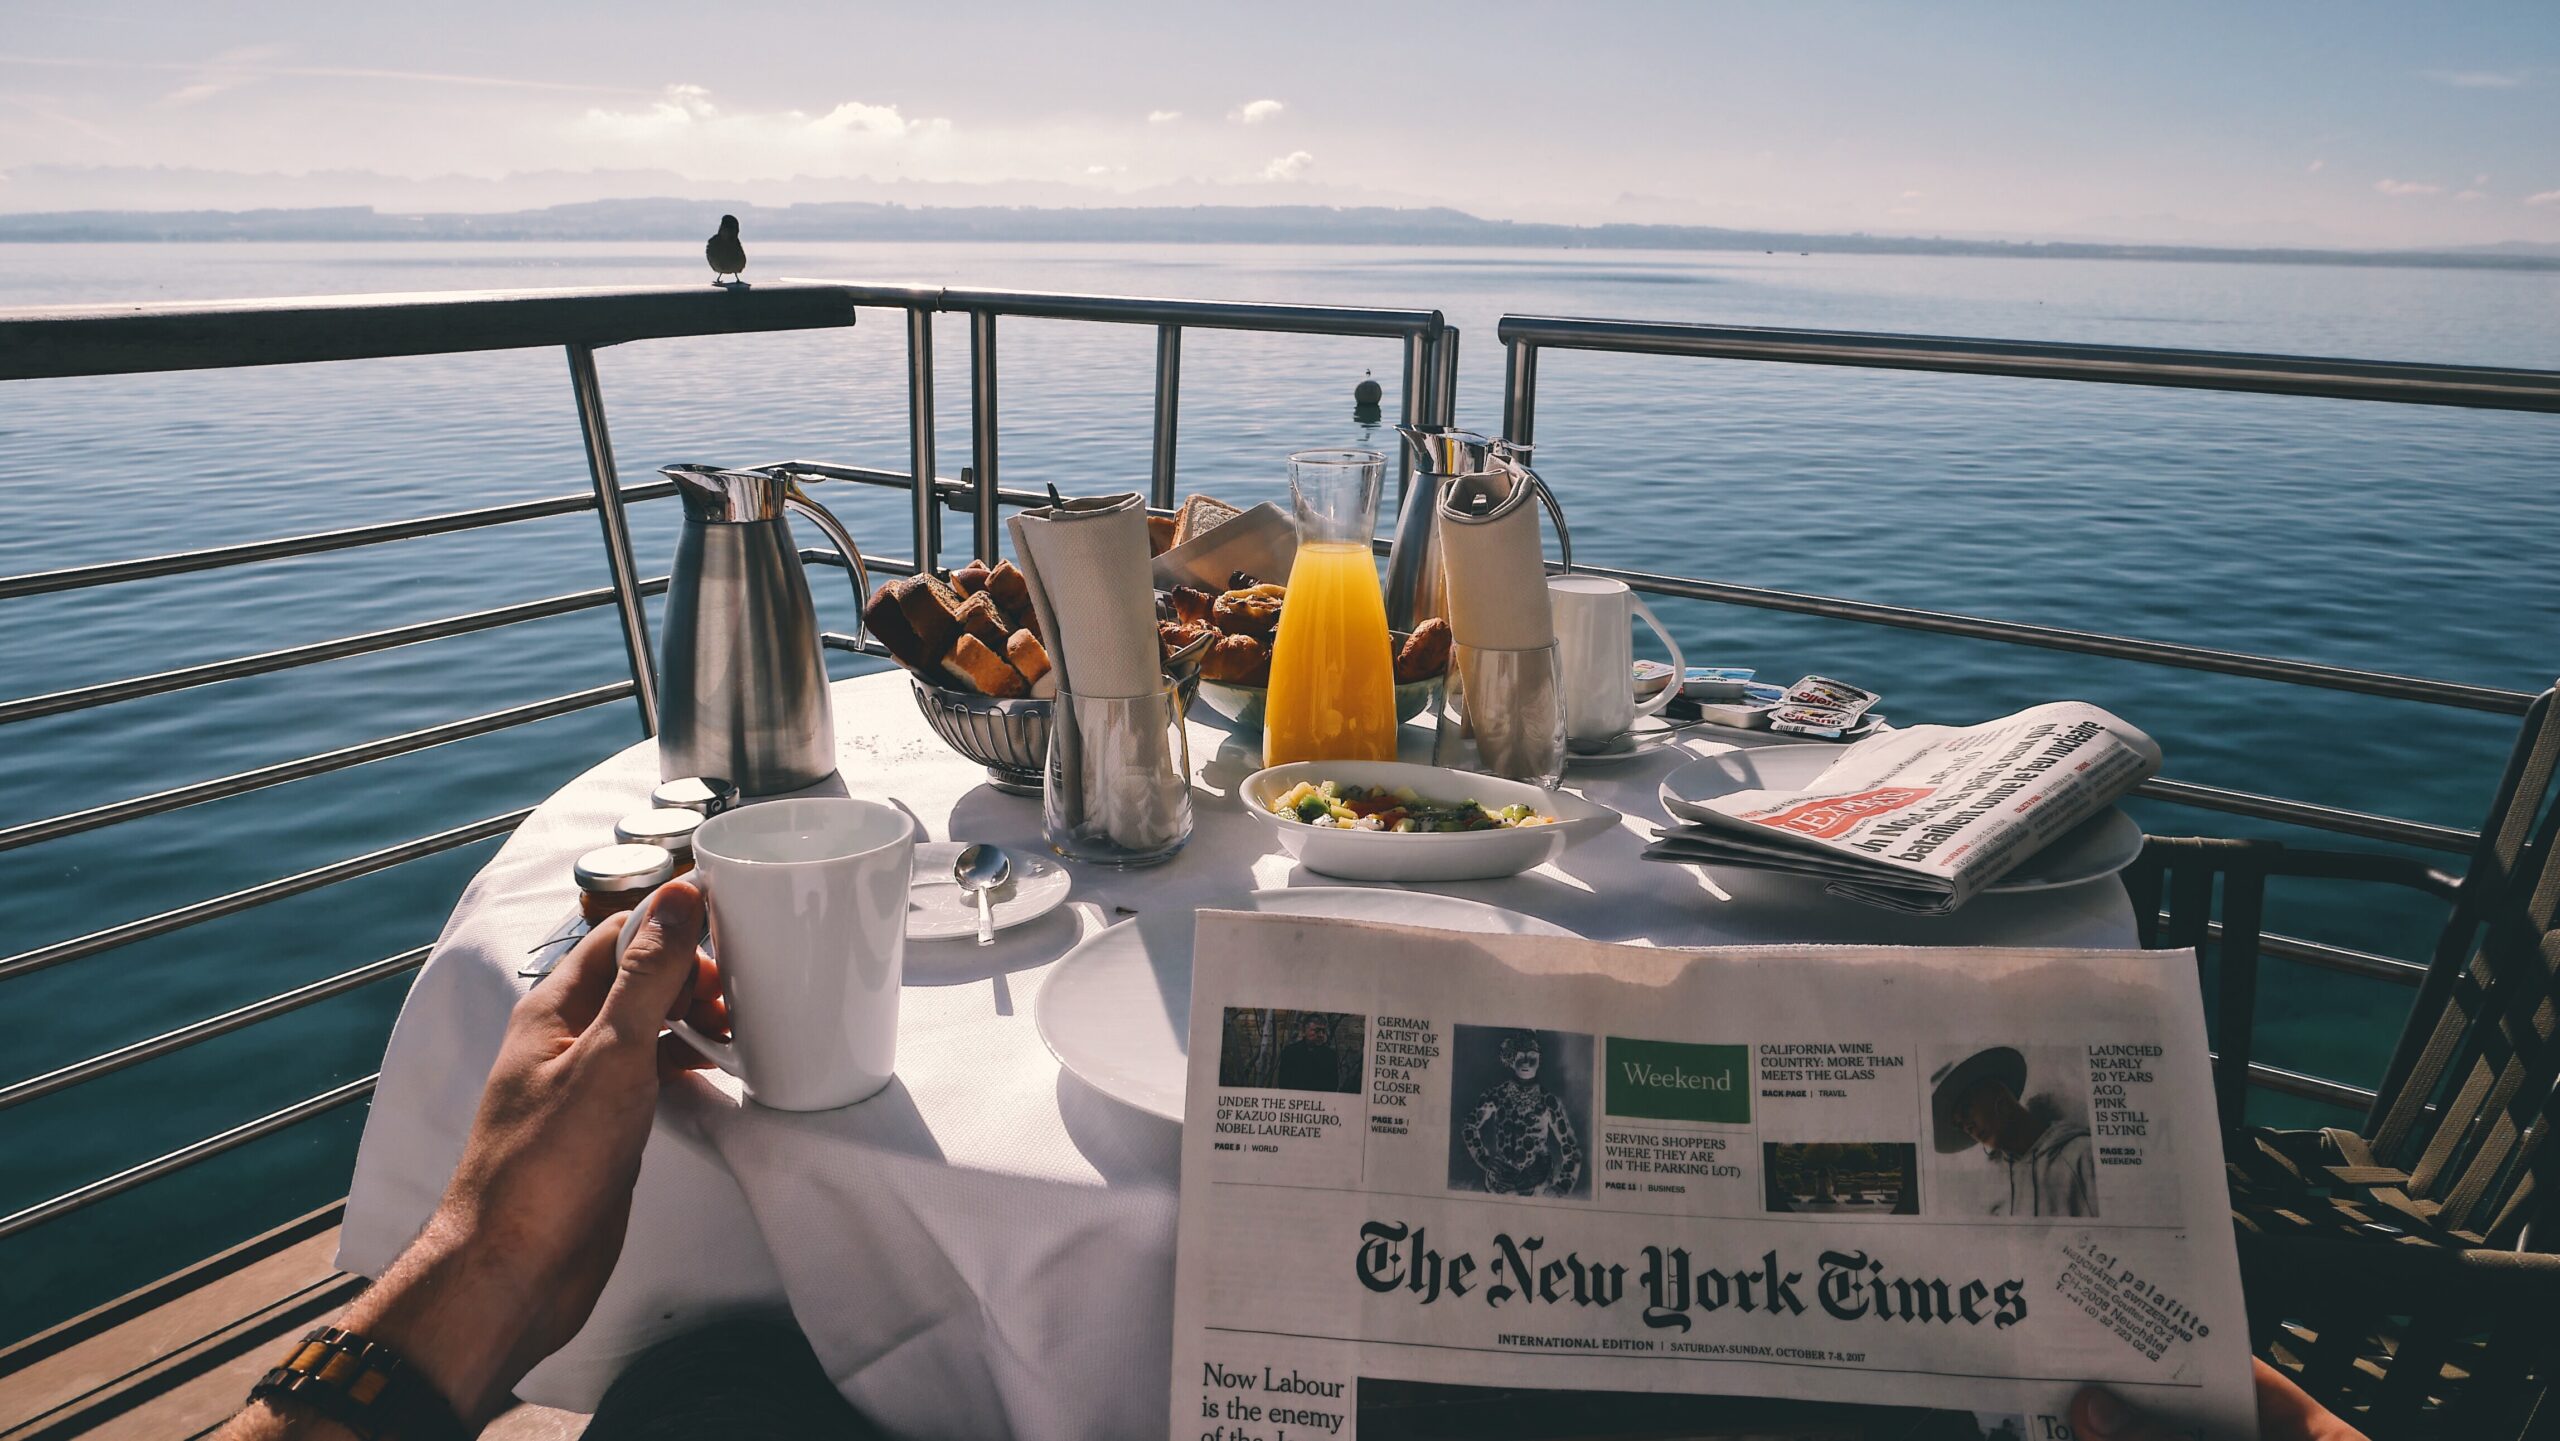 Having breakfast and reading on the balcony of your Alaskan cruise wedding